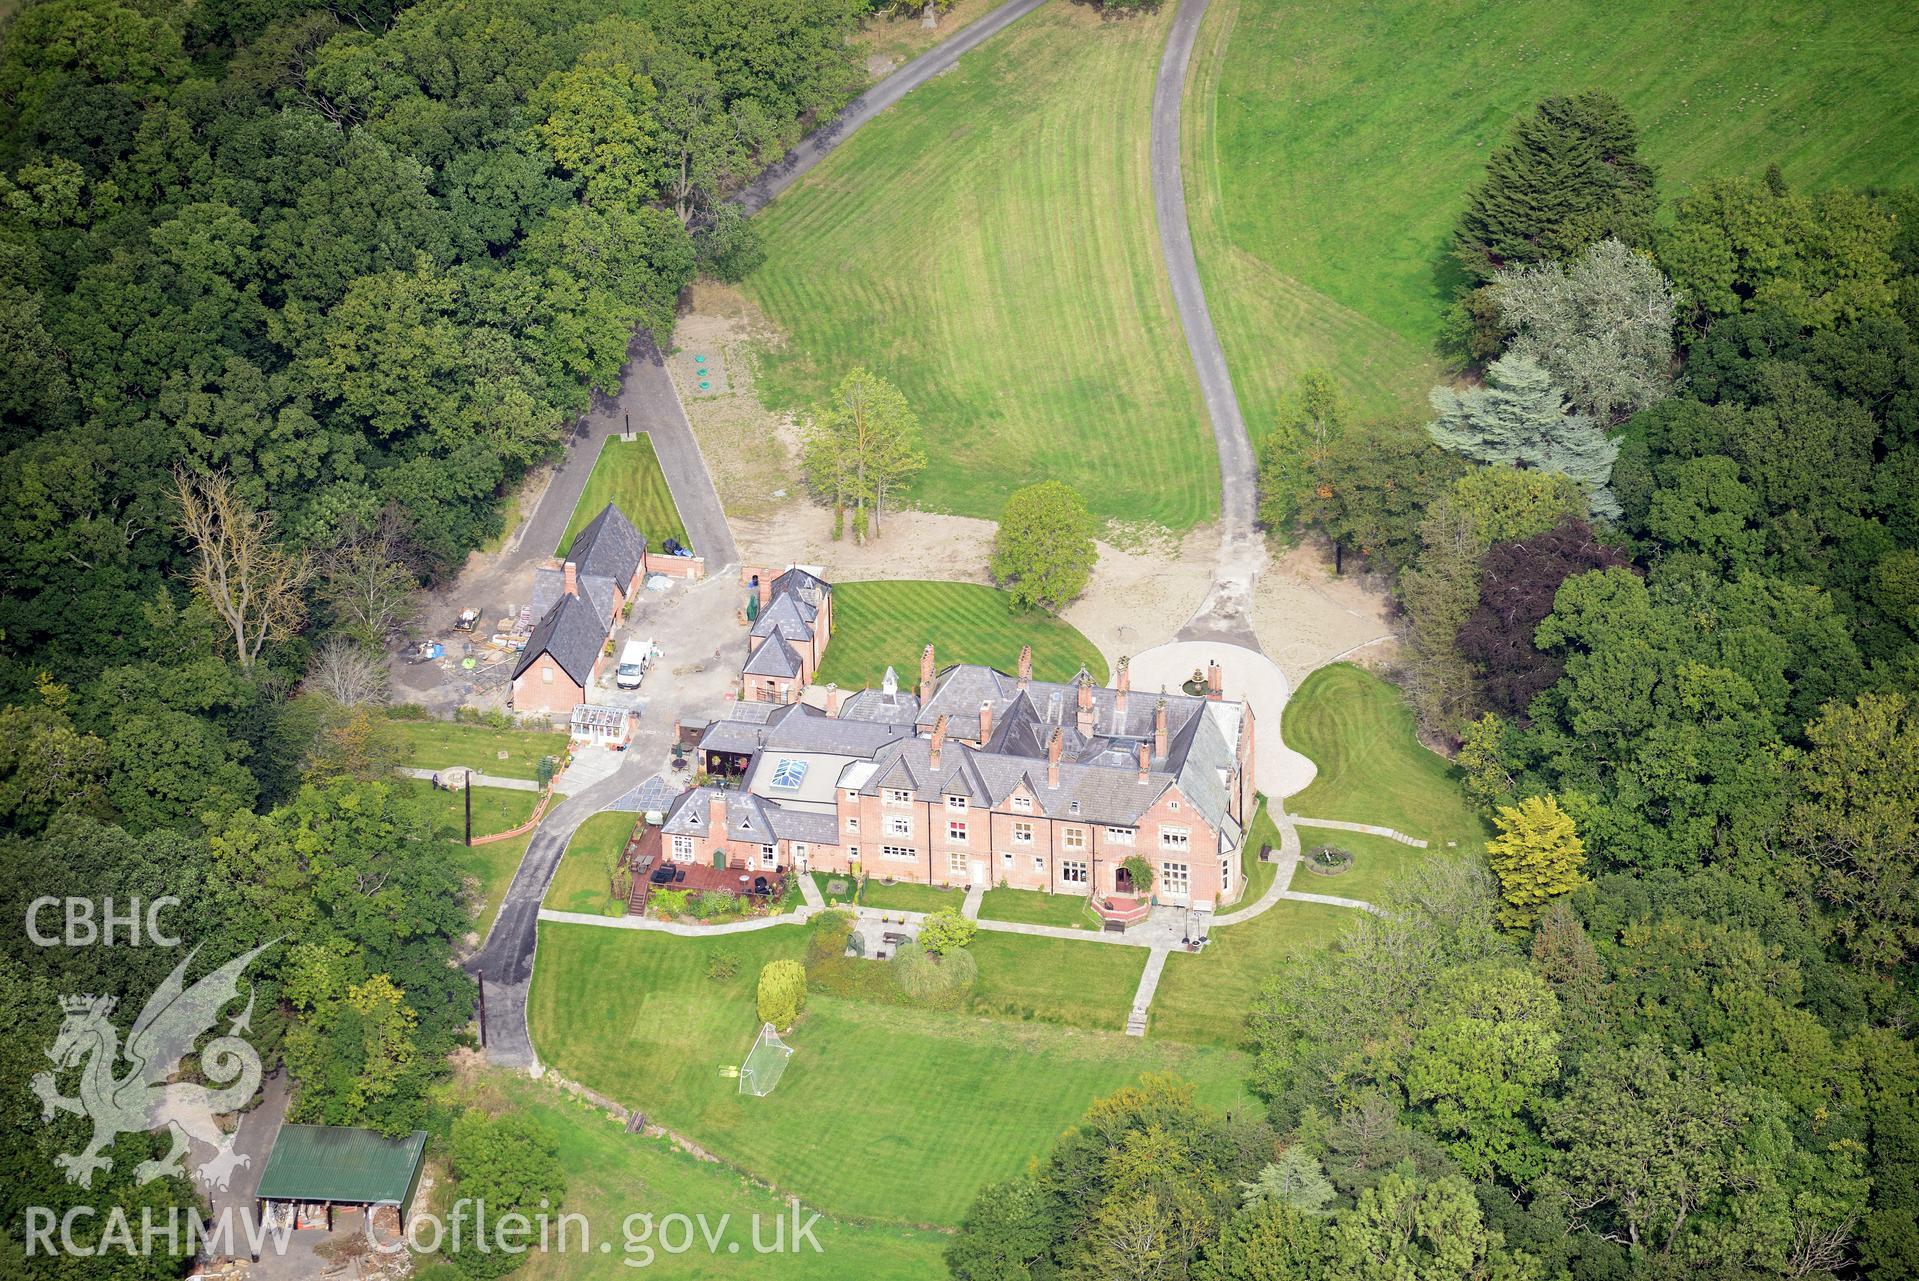 Nantllys house and gardens, Tremeirchion. Oblique aerial photograph taken during the Royal Commission?s programme of archaeological aerial reconnaissance by Toby Driver on 11th September 2015.